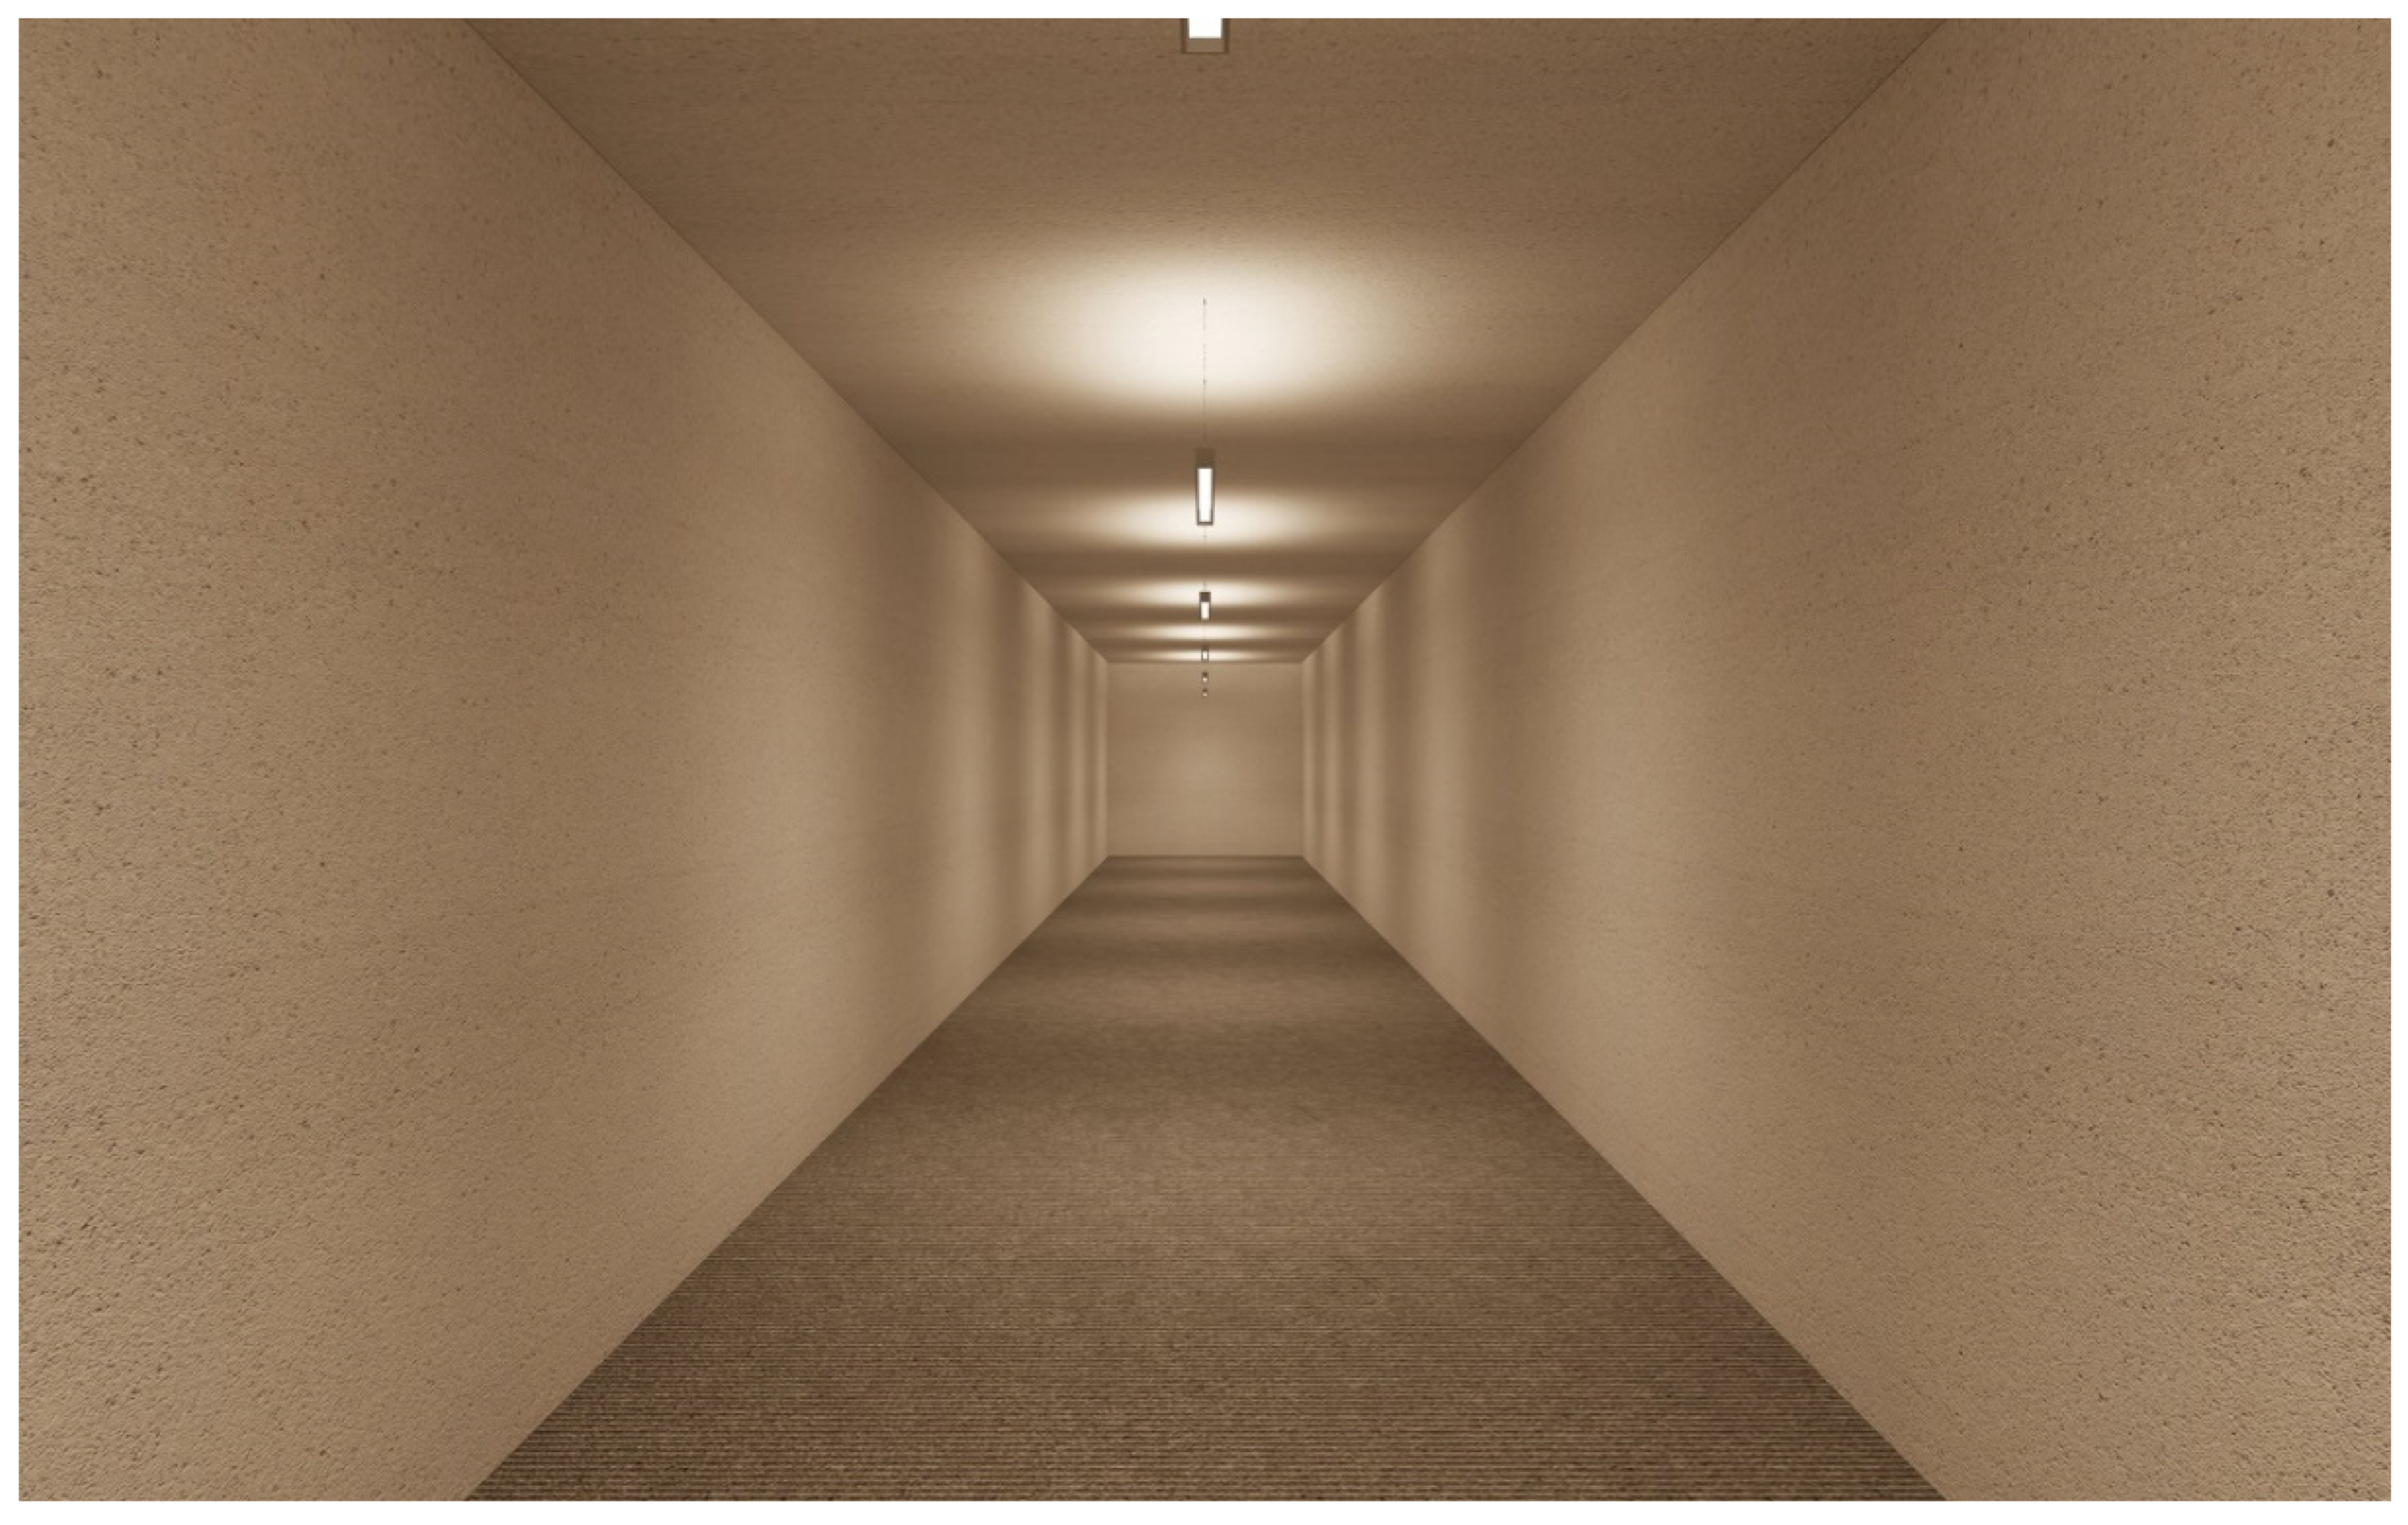 dug Hvor sjældenhed Energies | Free Full-Text | Brightness and Uniformity Perception of Virtual  Corridor with Artificial Lighting Systems